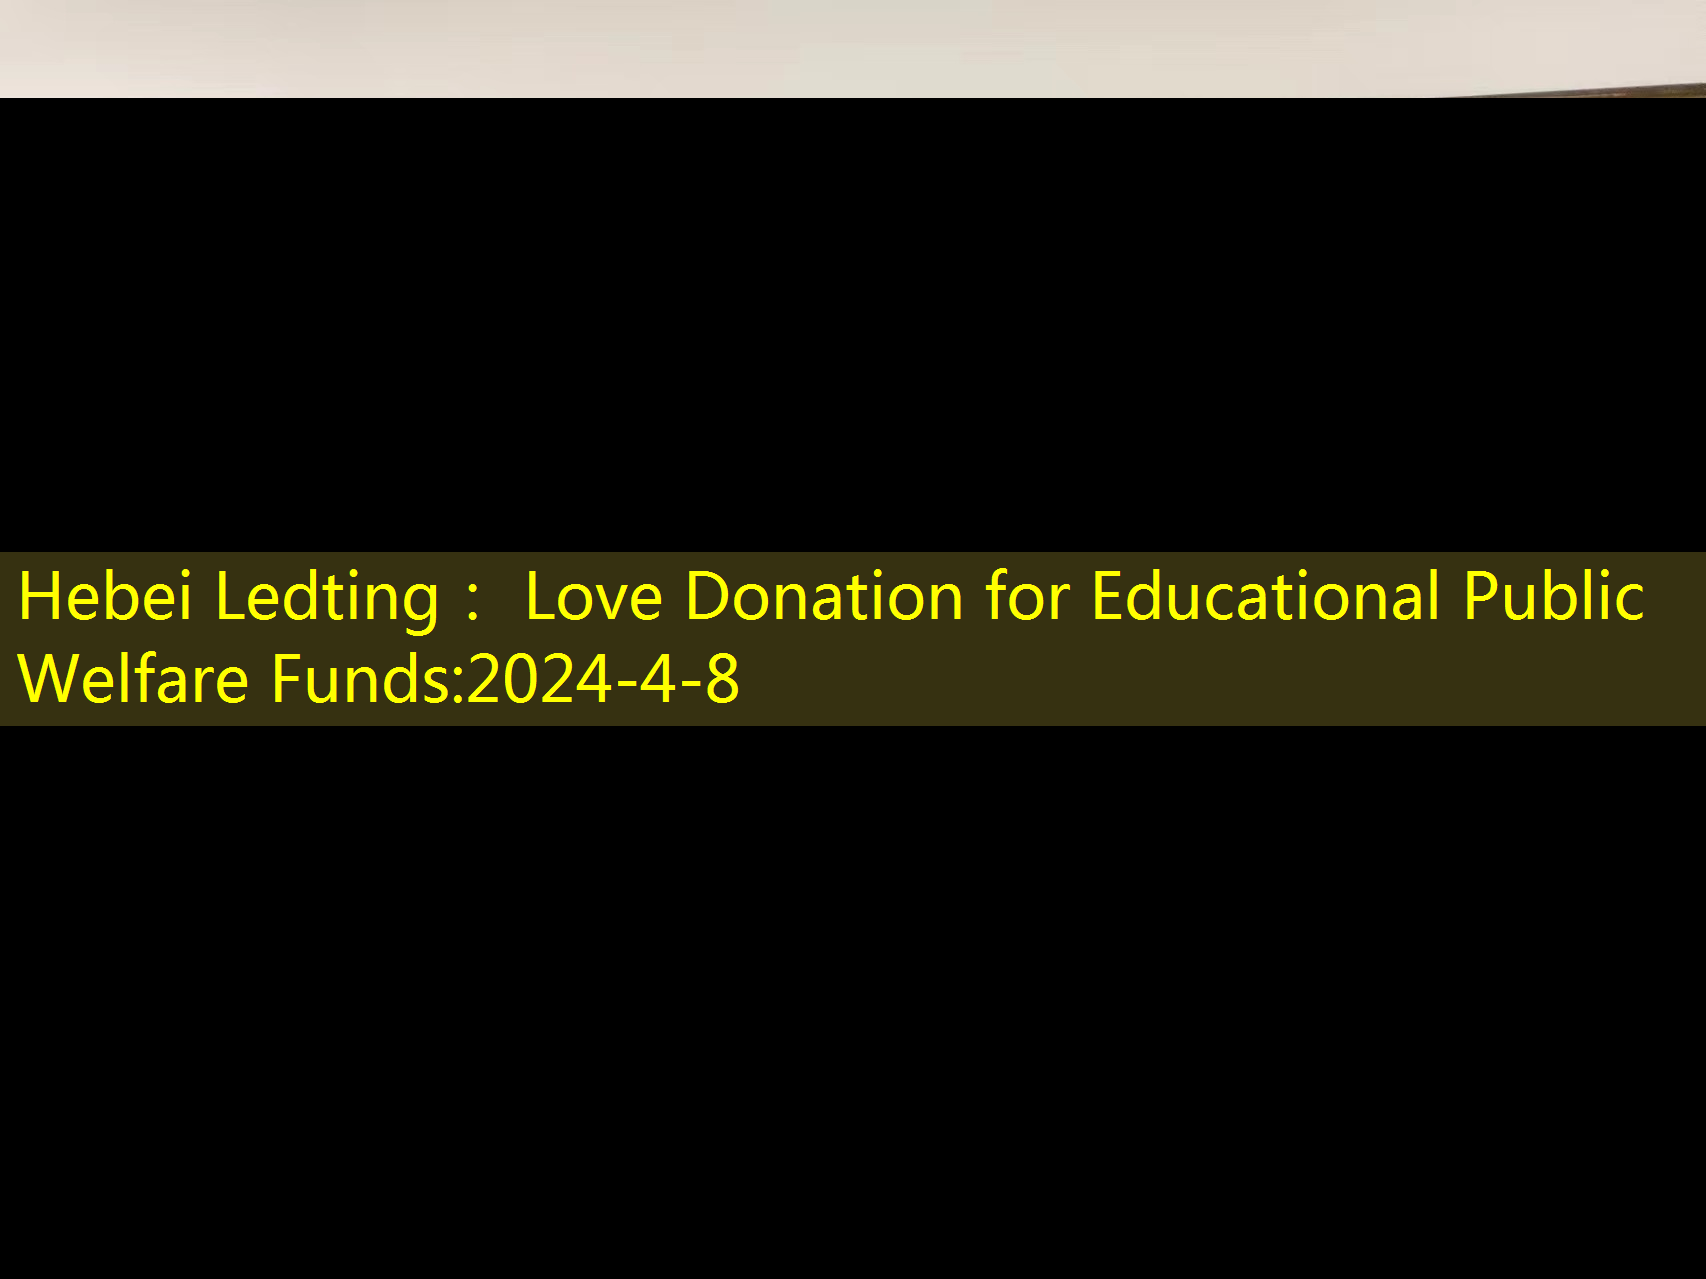 Hebei Ledting： Love Donation for Educational Public Welfare Funds